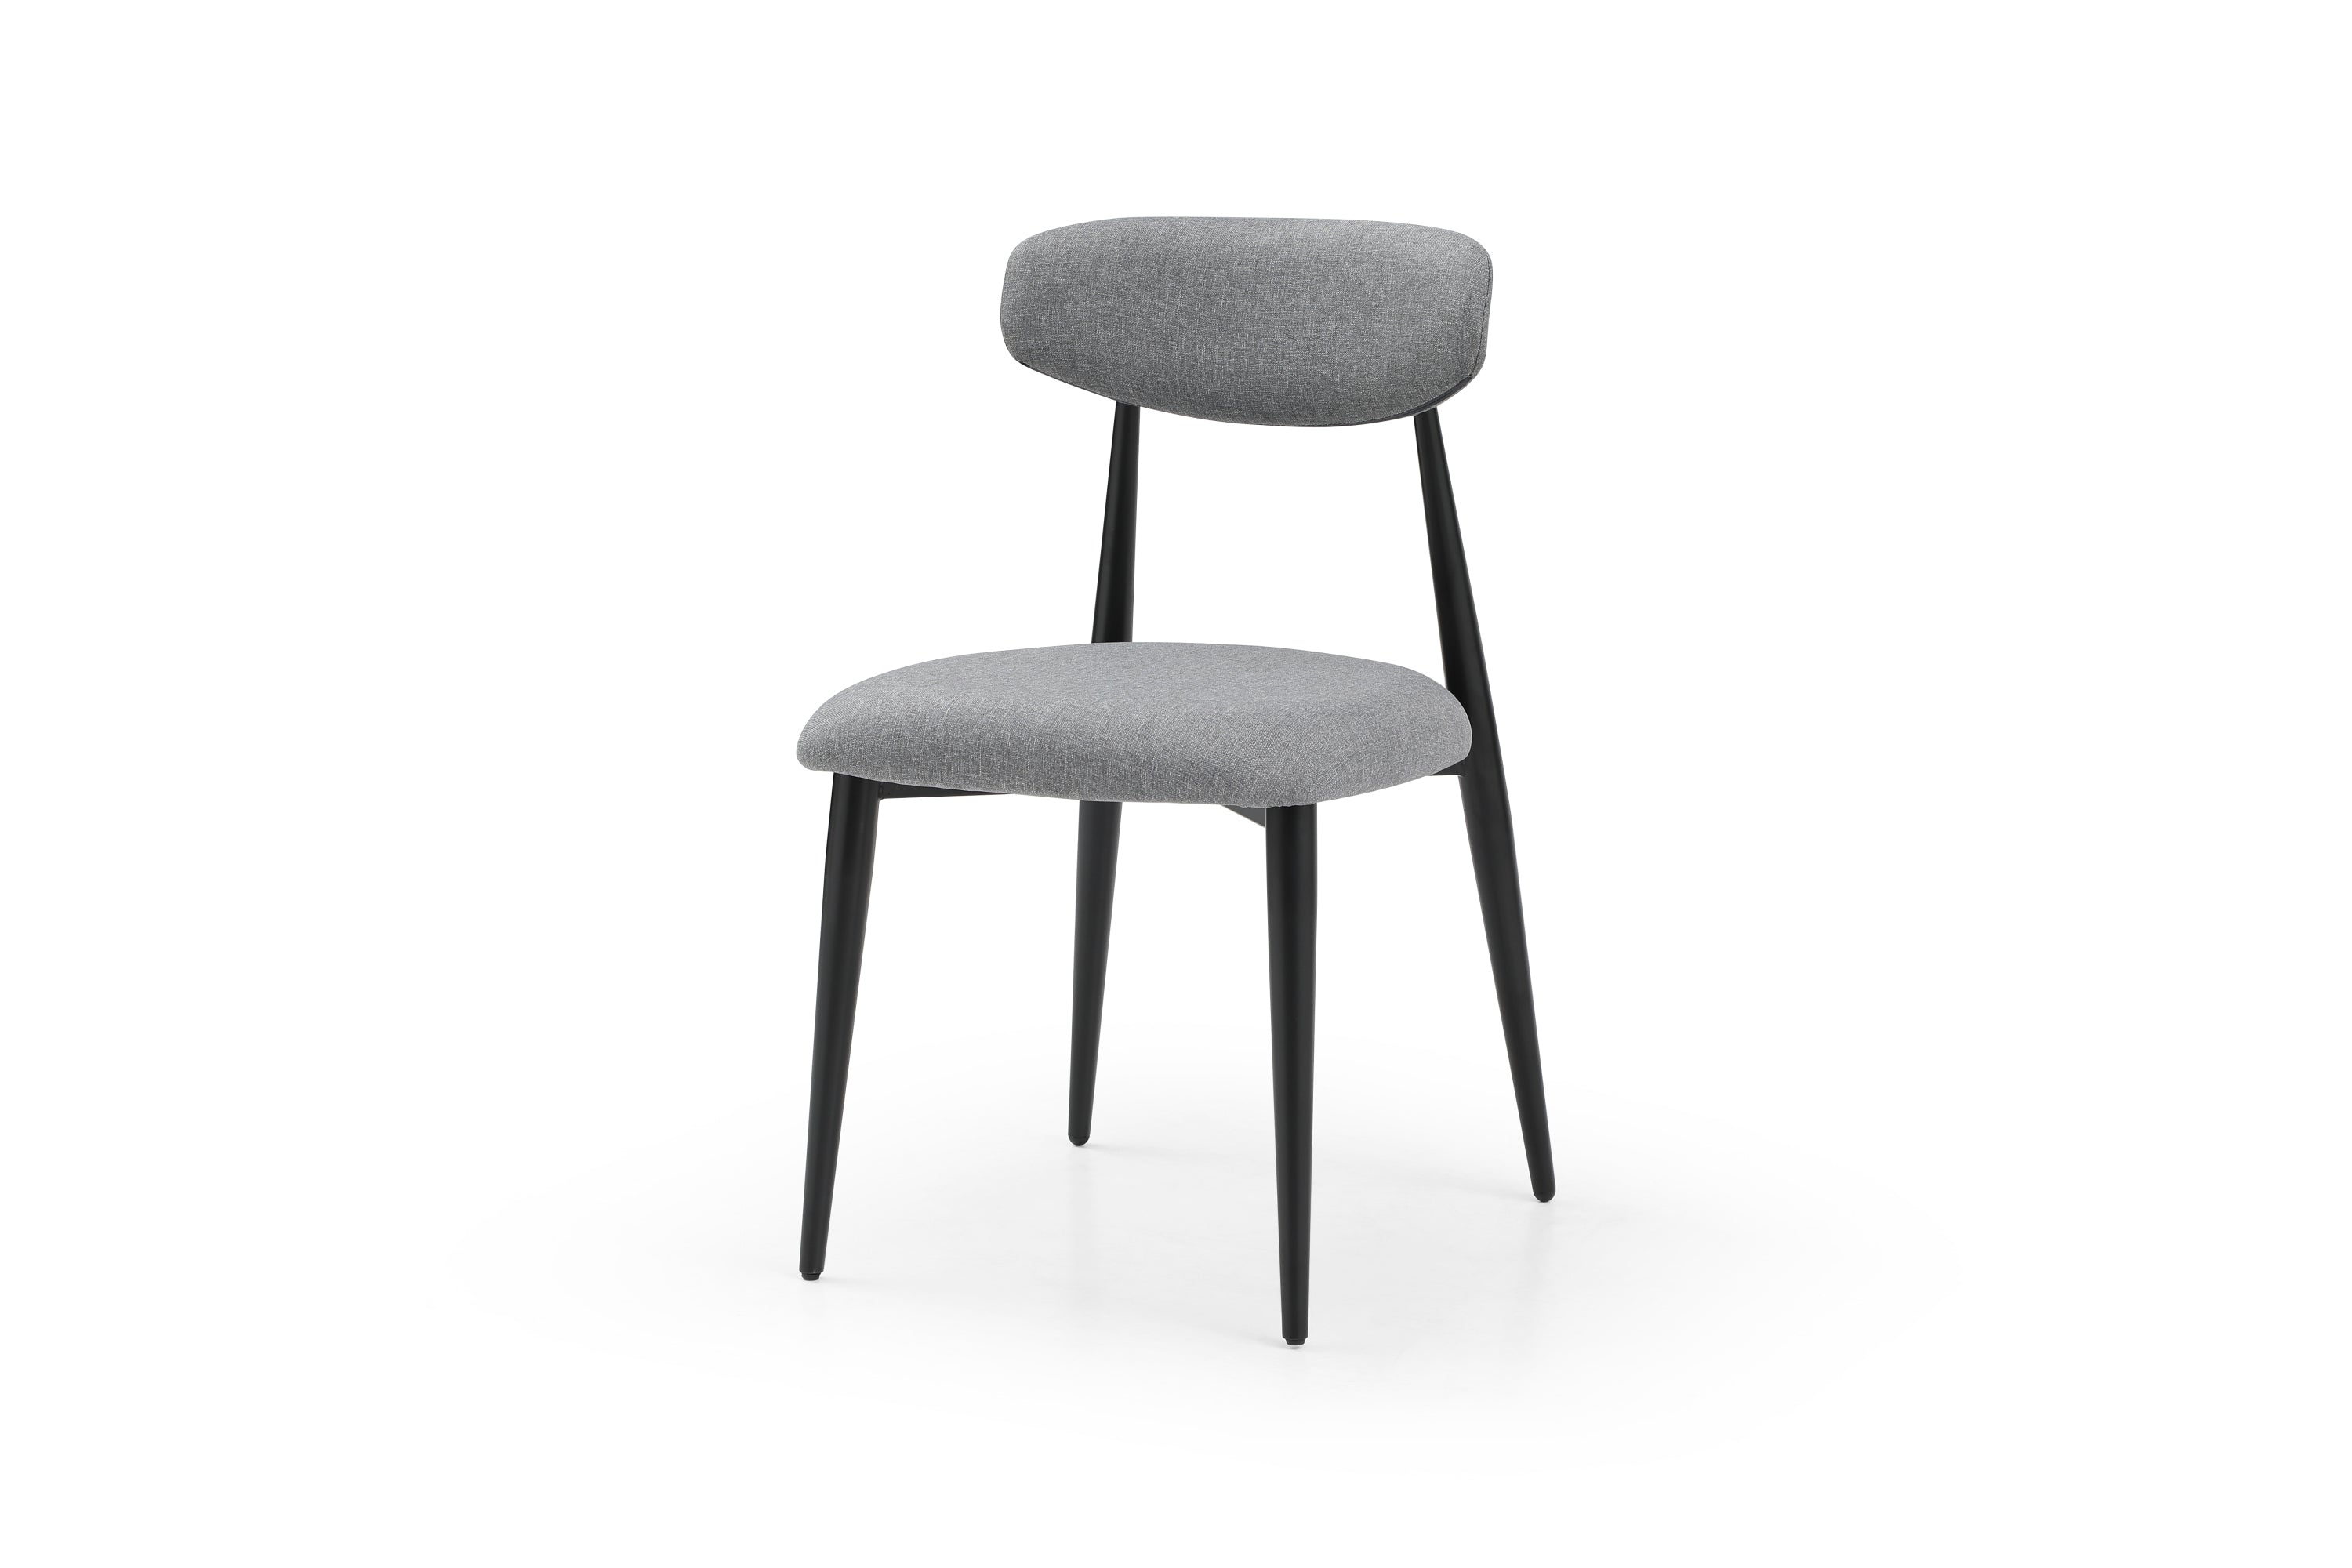 (Set of 4) Modern Dining Chairs , Curved Backrest Round Upholstered and Metal Frame,Grey